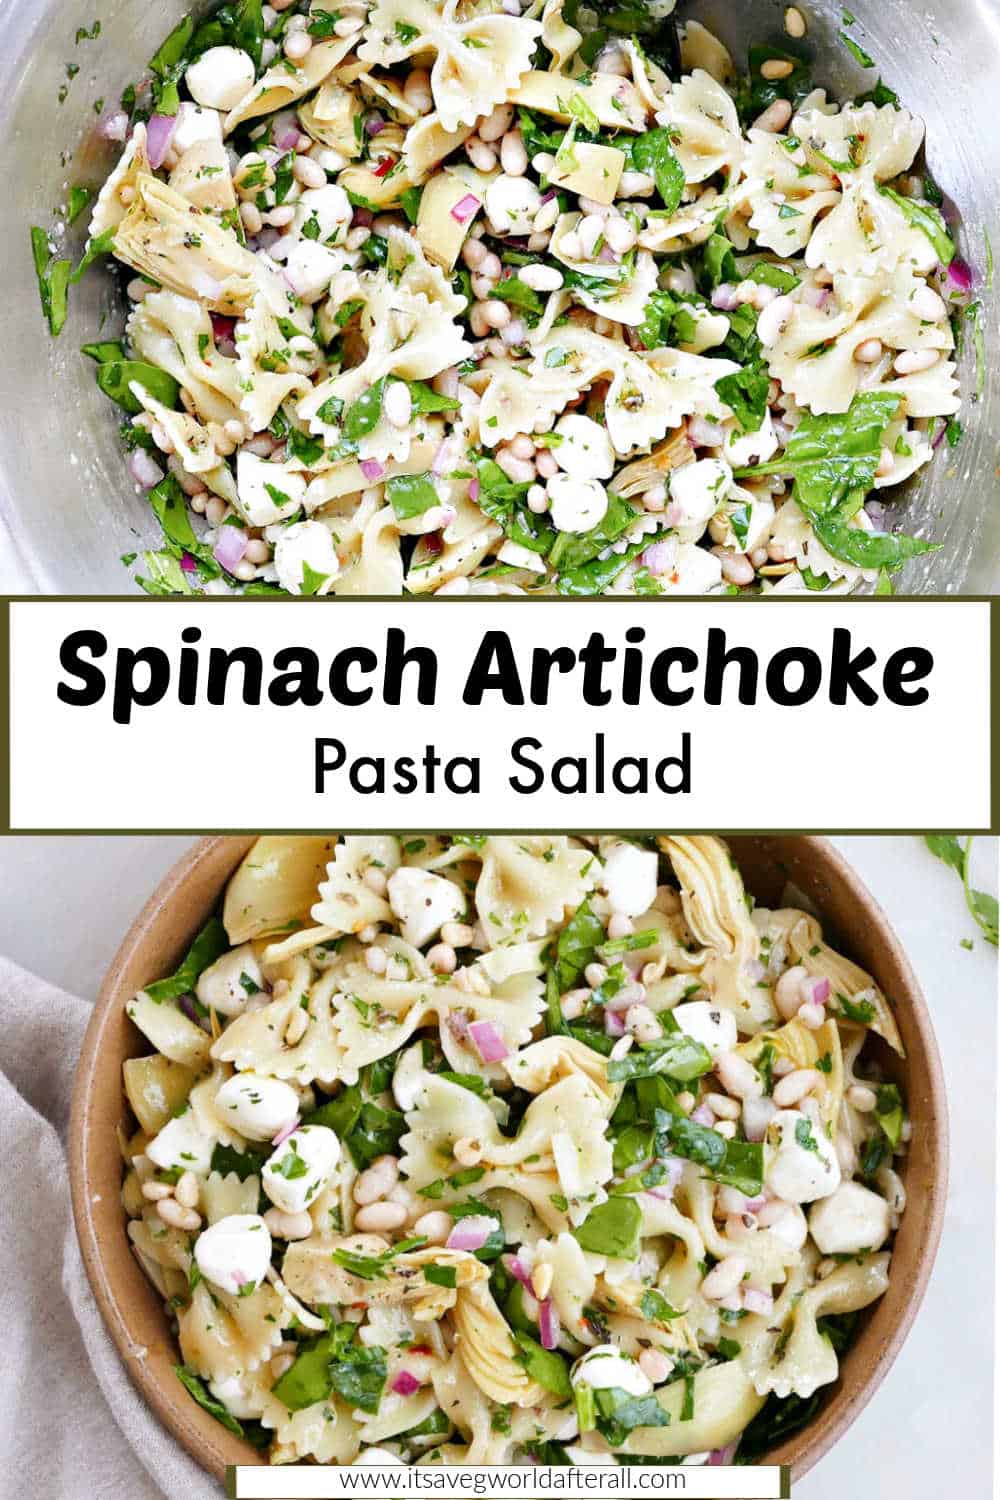 Pasta Salad with Artichokes and Spinach - It's a Veg World After All®